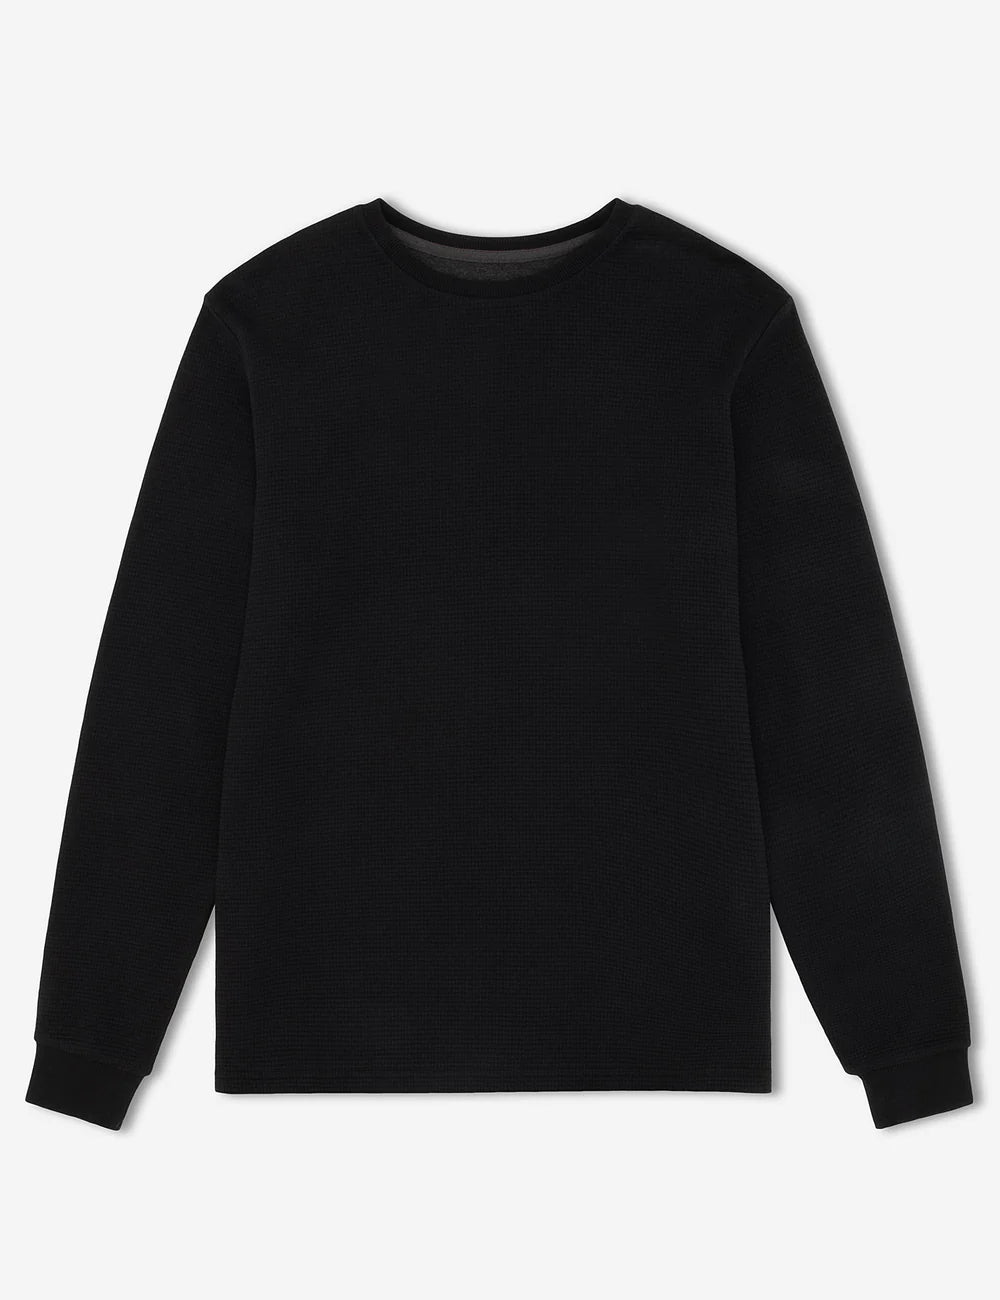 Mr Simple - Smith Long Sleeve Waffle Tee in Black | Buster McGee